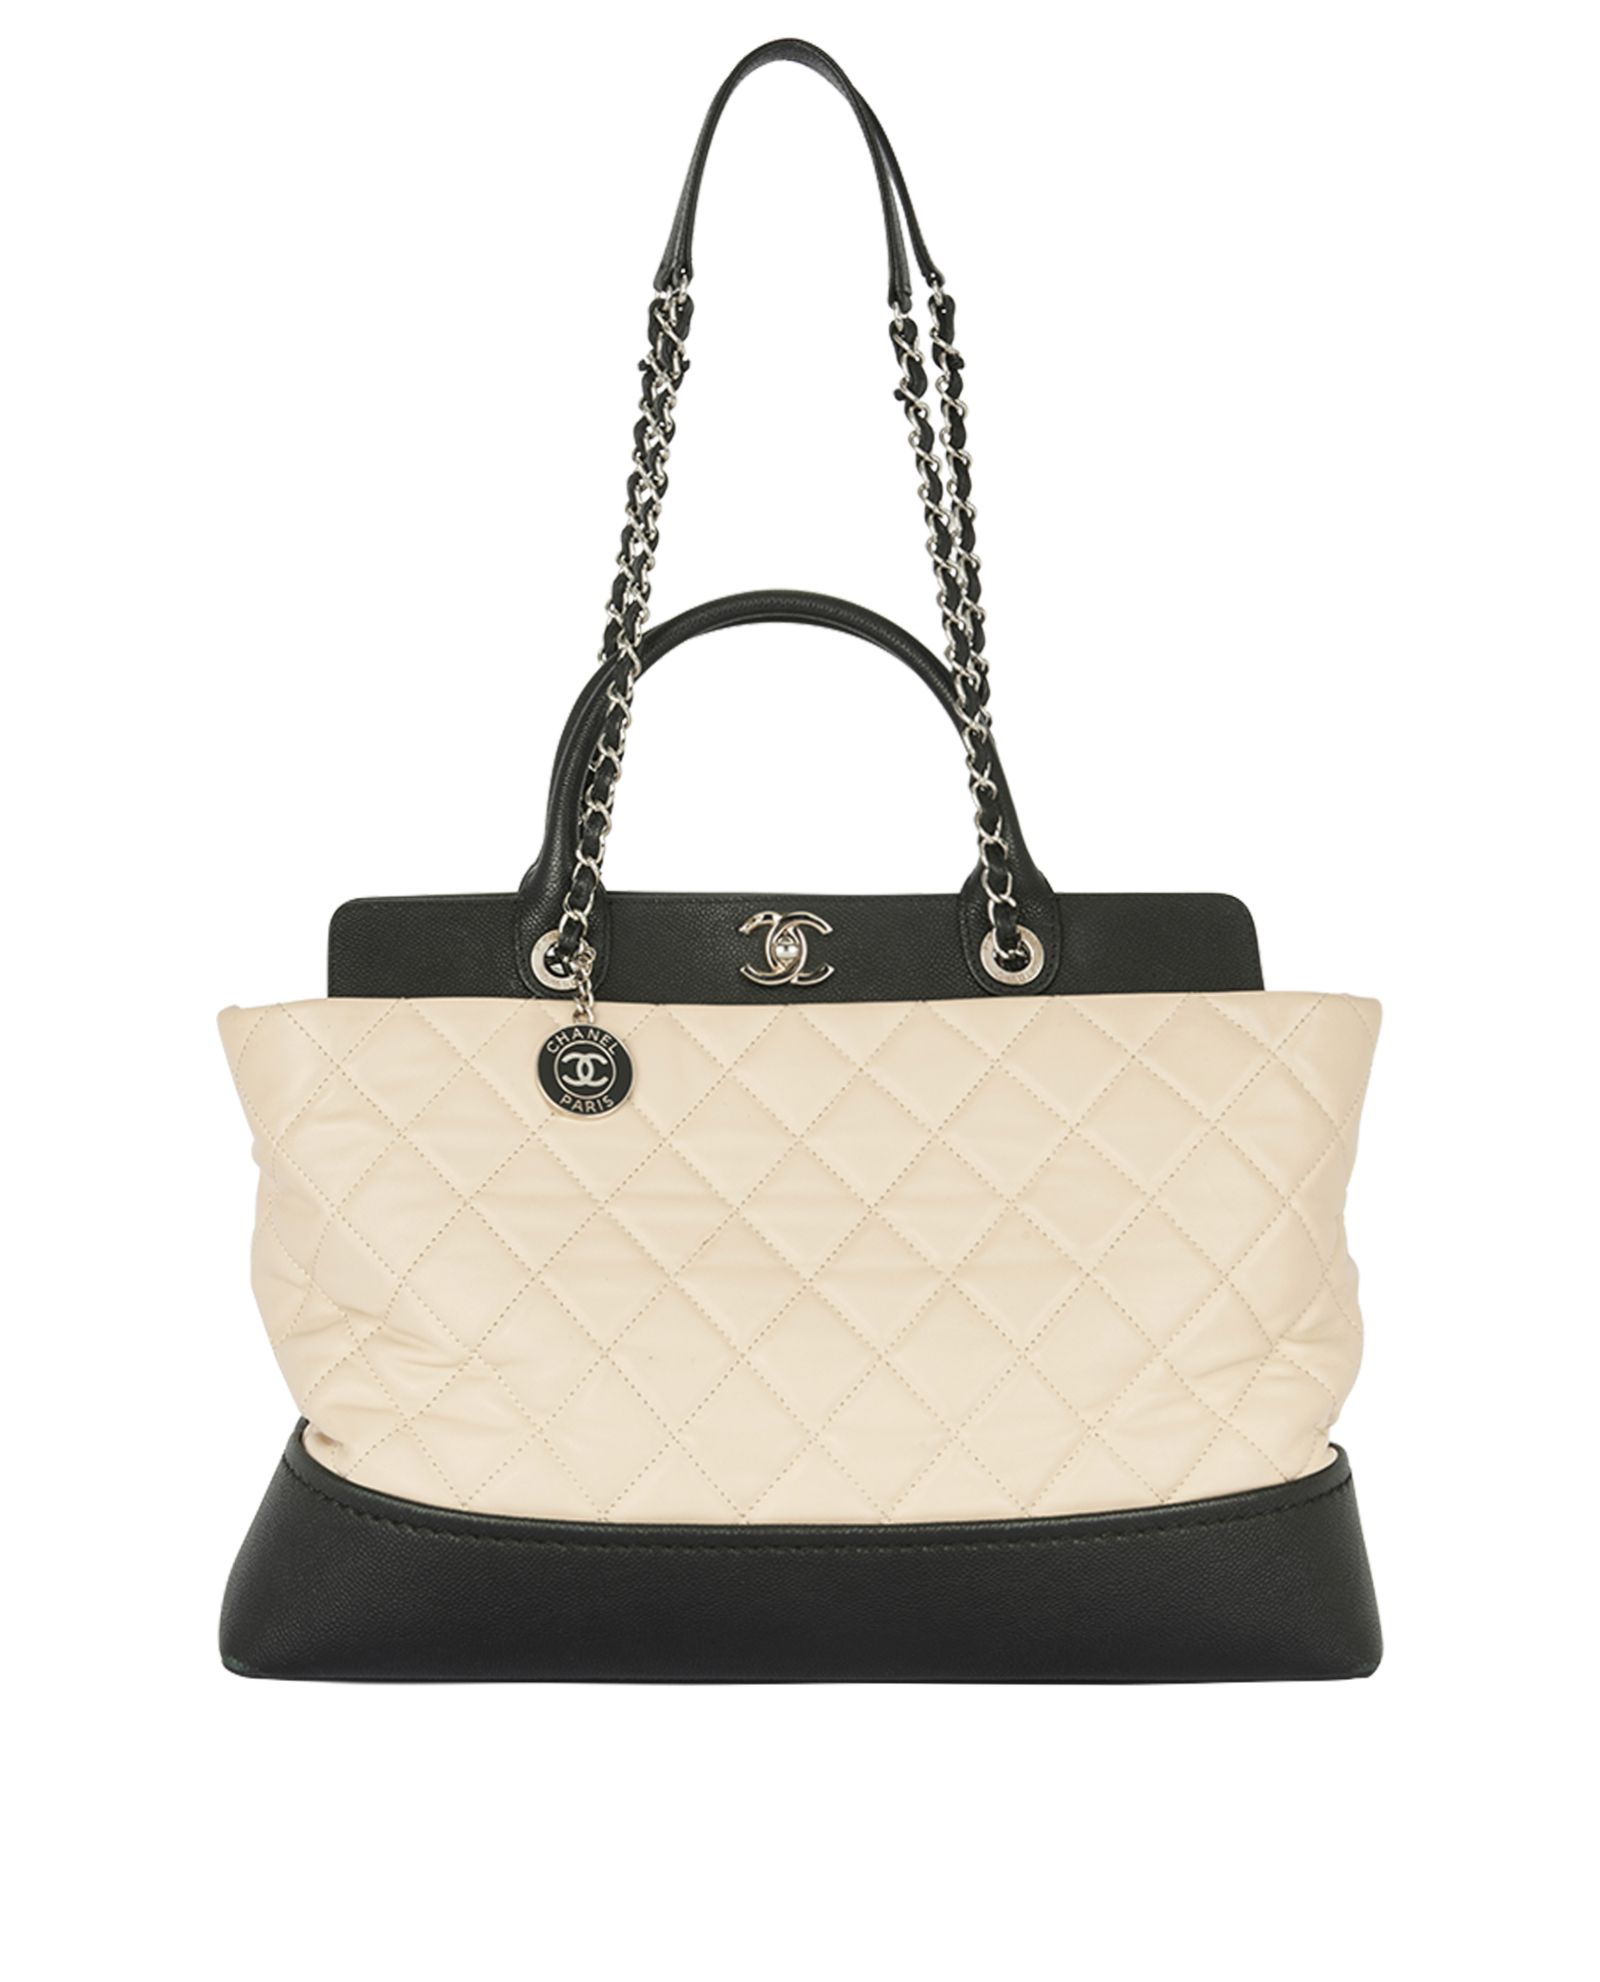 Chanel Coco Shopping Tote